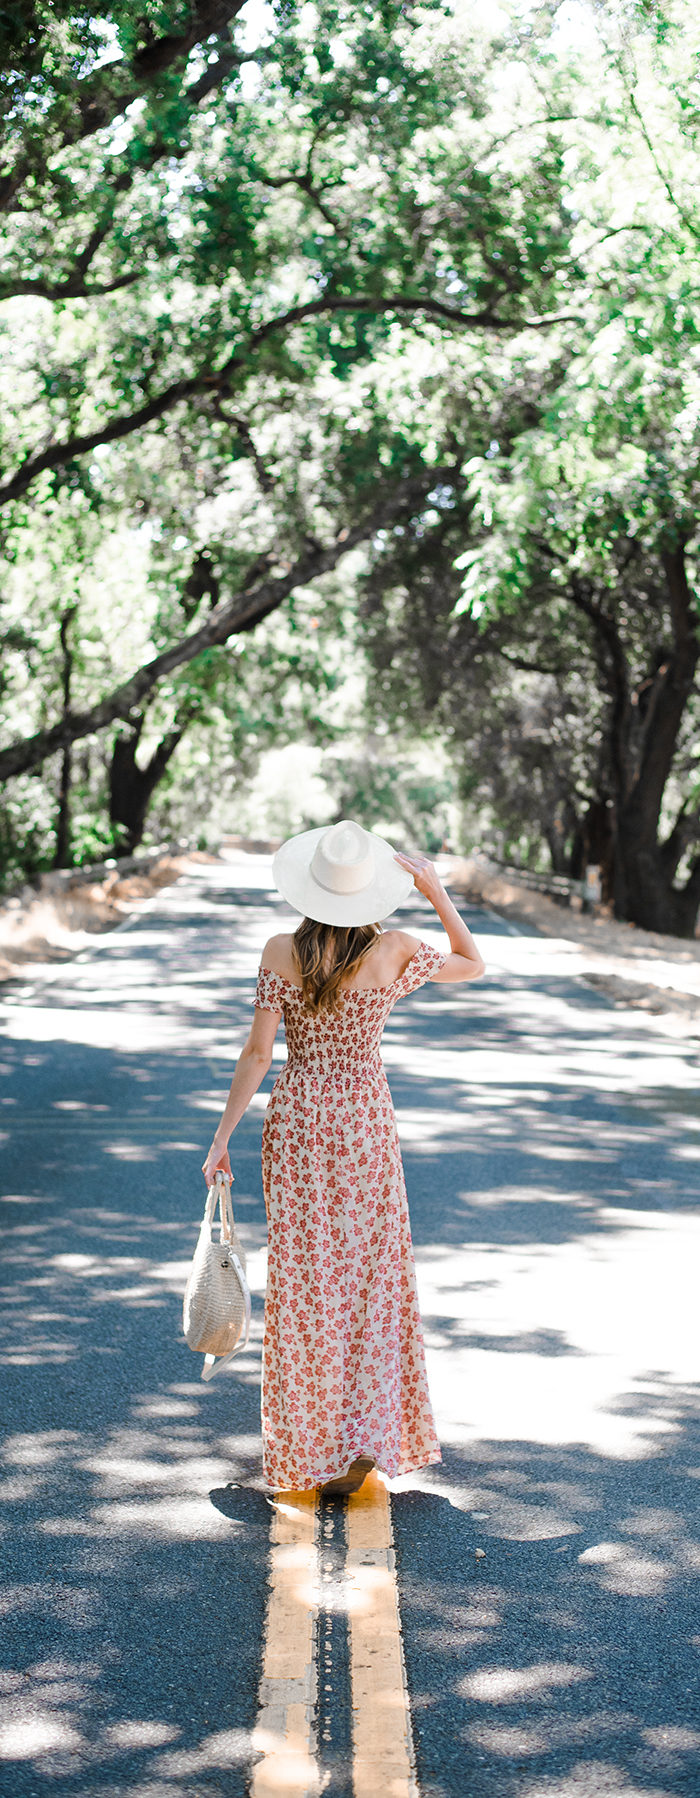 Alyssa Campanella of The A List blog visits Frog's Leap Winery outside Yountville wearing Tularosa Henderson maxi dress